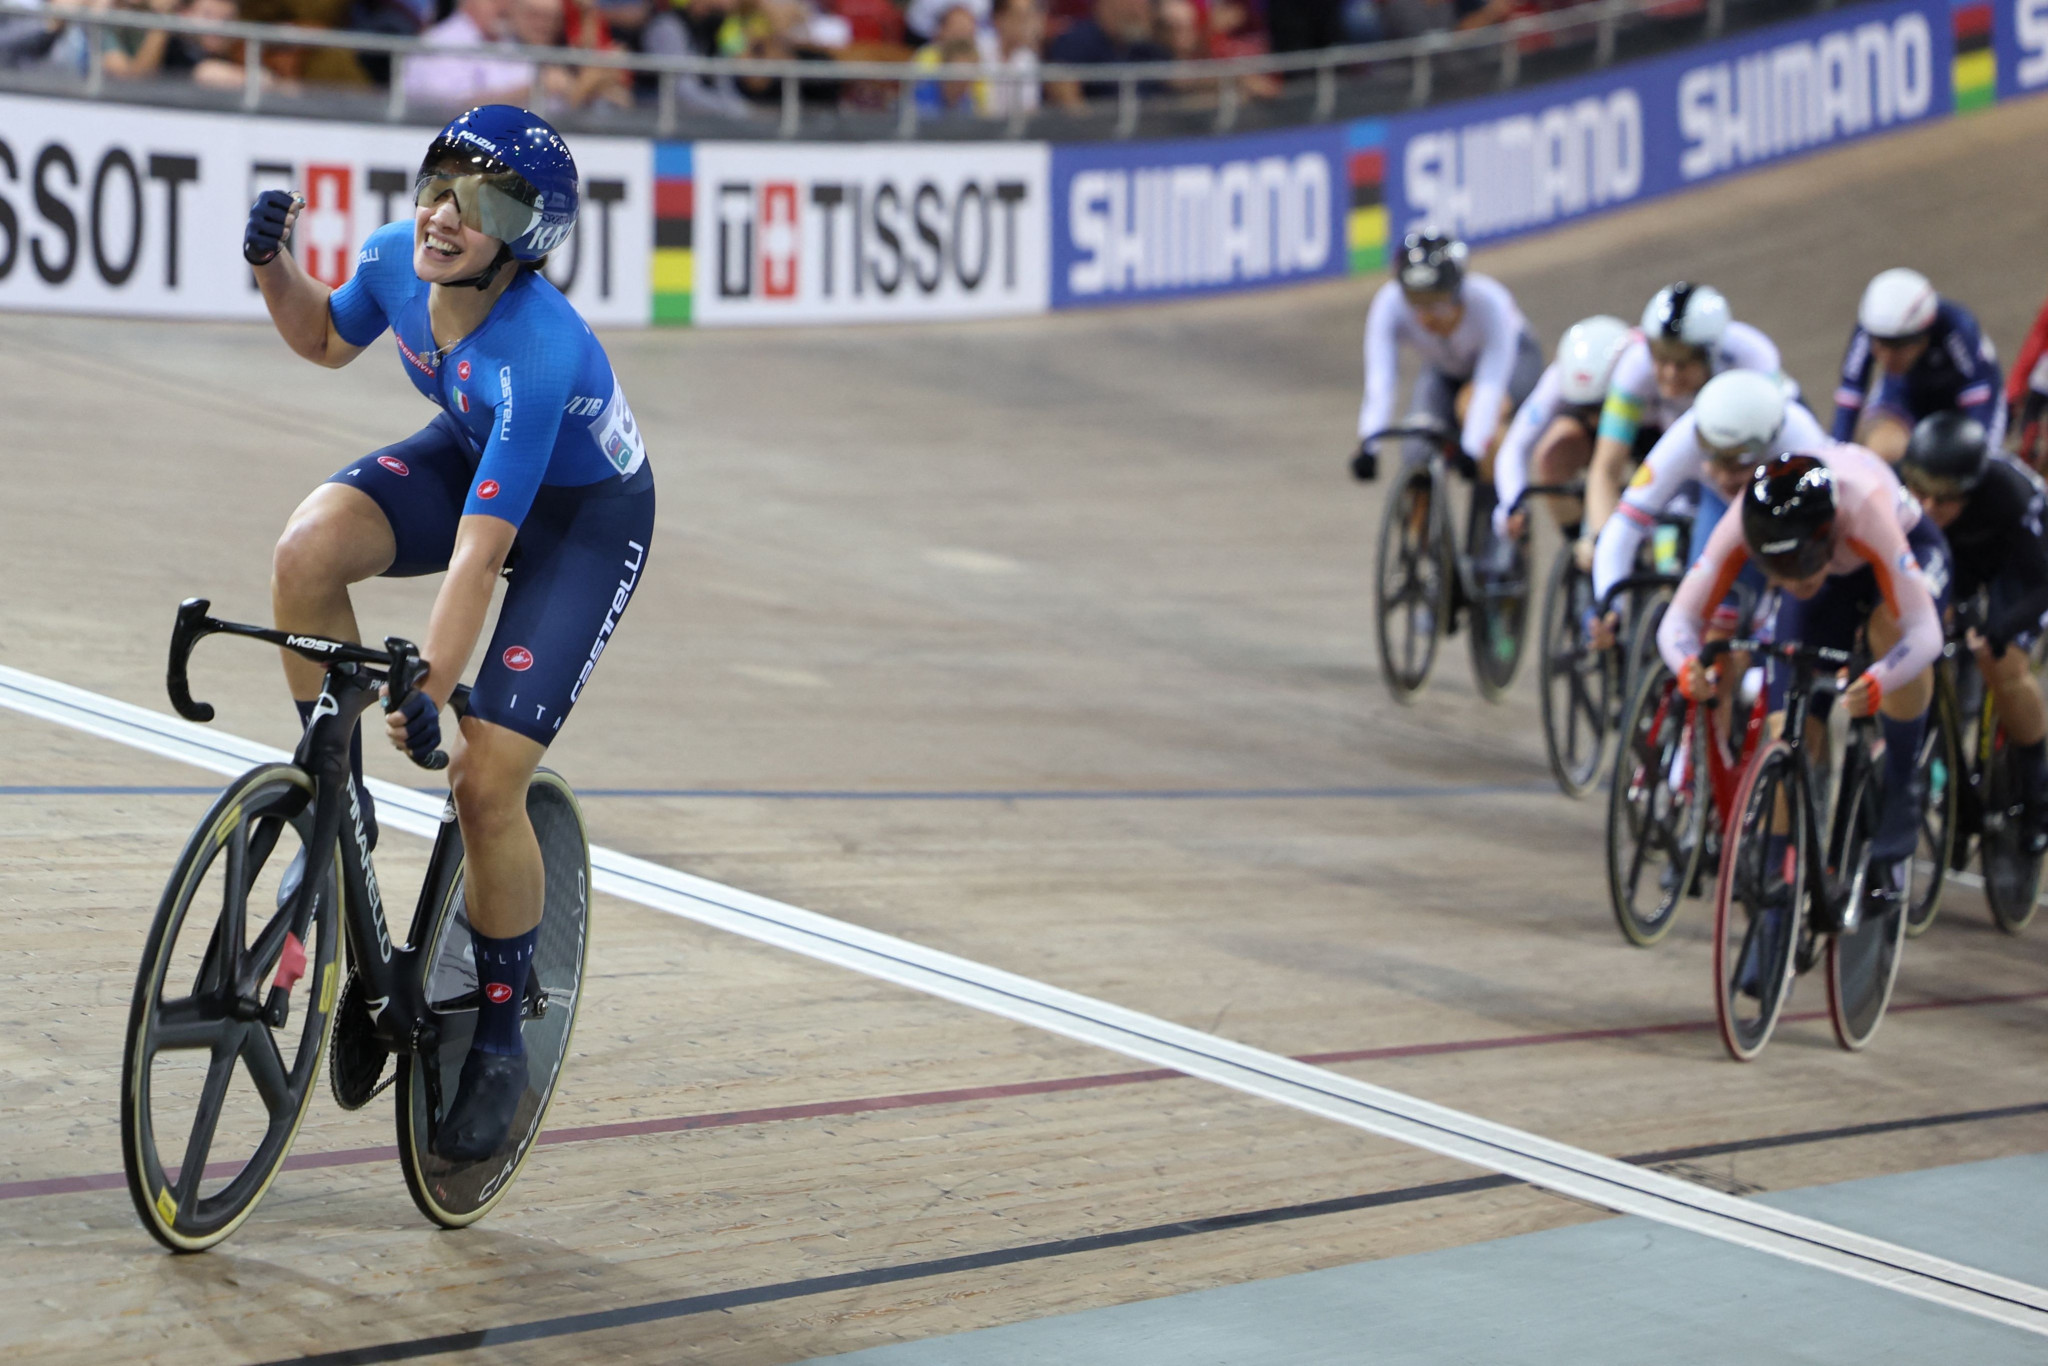 Italy's Martina Fidanza retained the women's scratch race title at the Track Cycling World Championships ©Getty Images